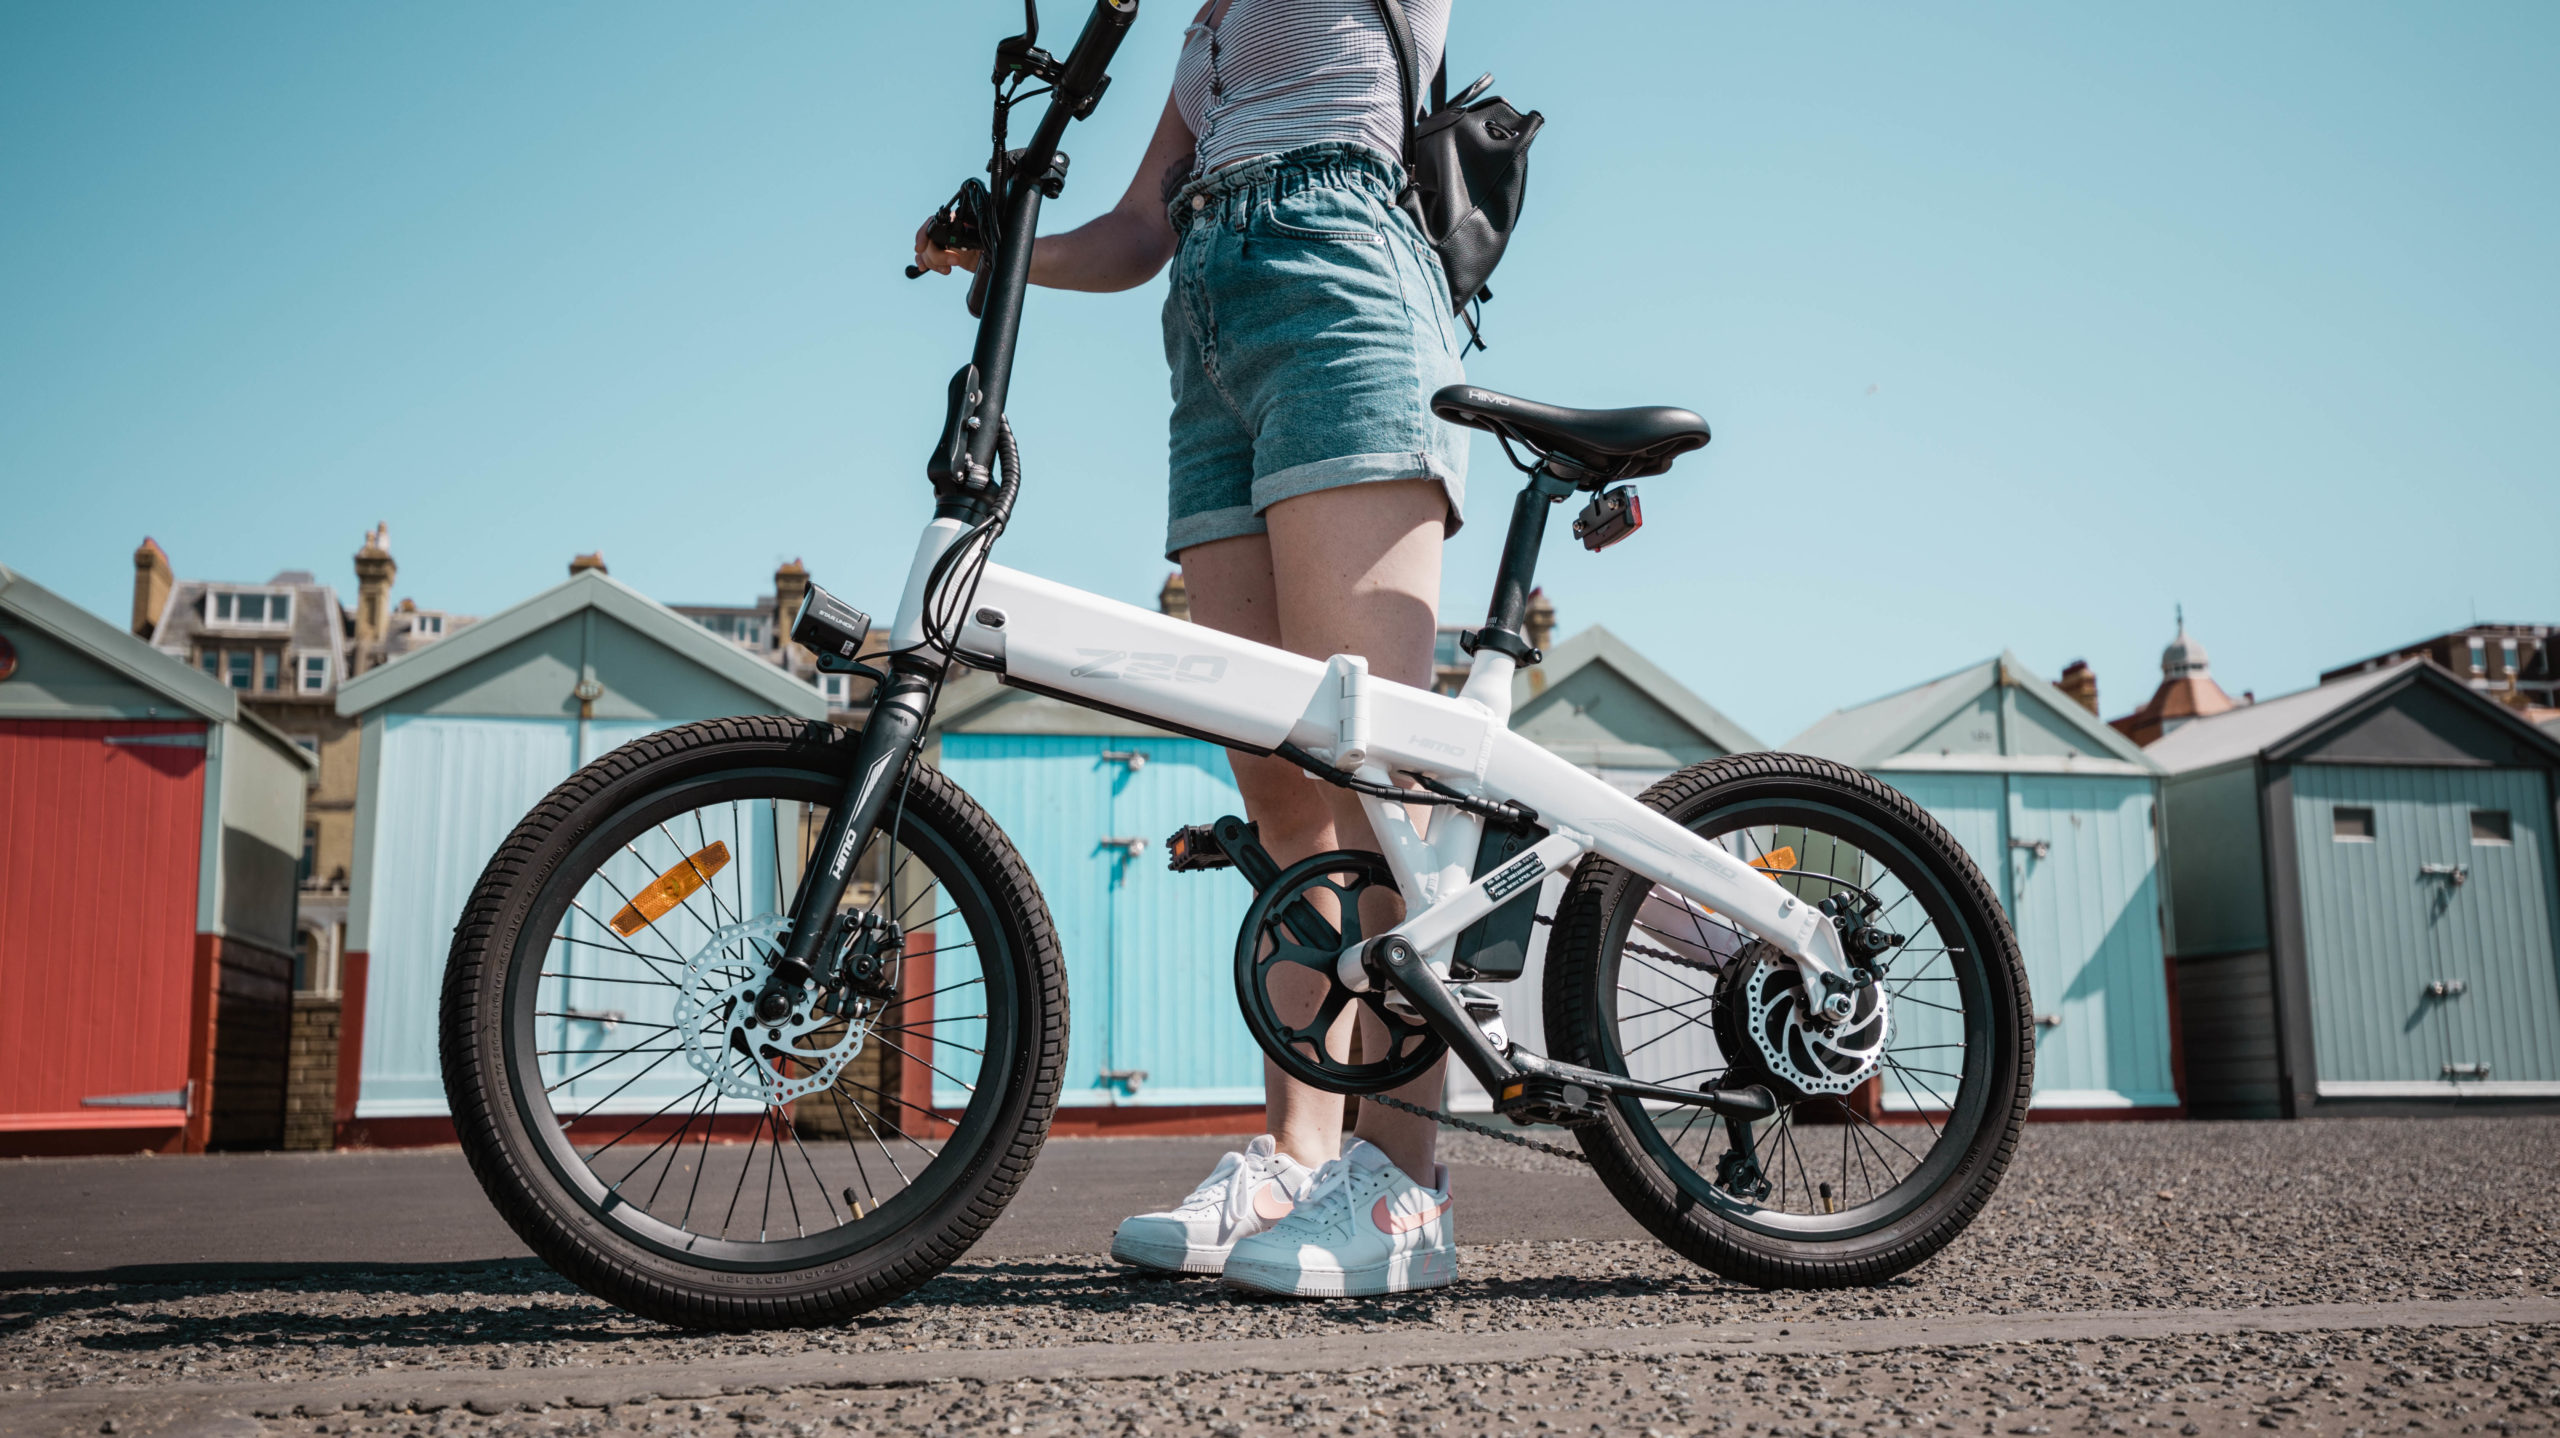 HiMo launches new dual mode folding electric bike on Indiegogo